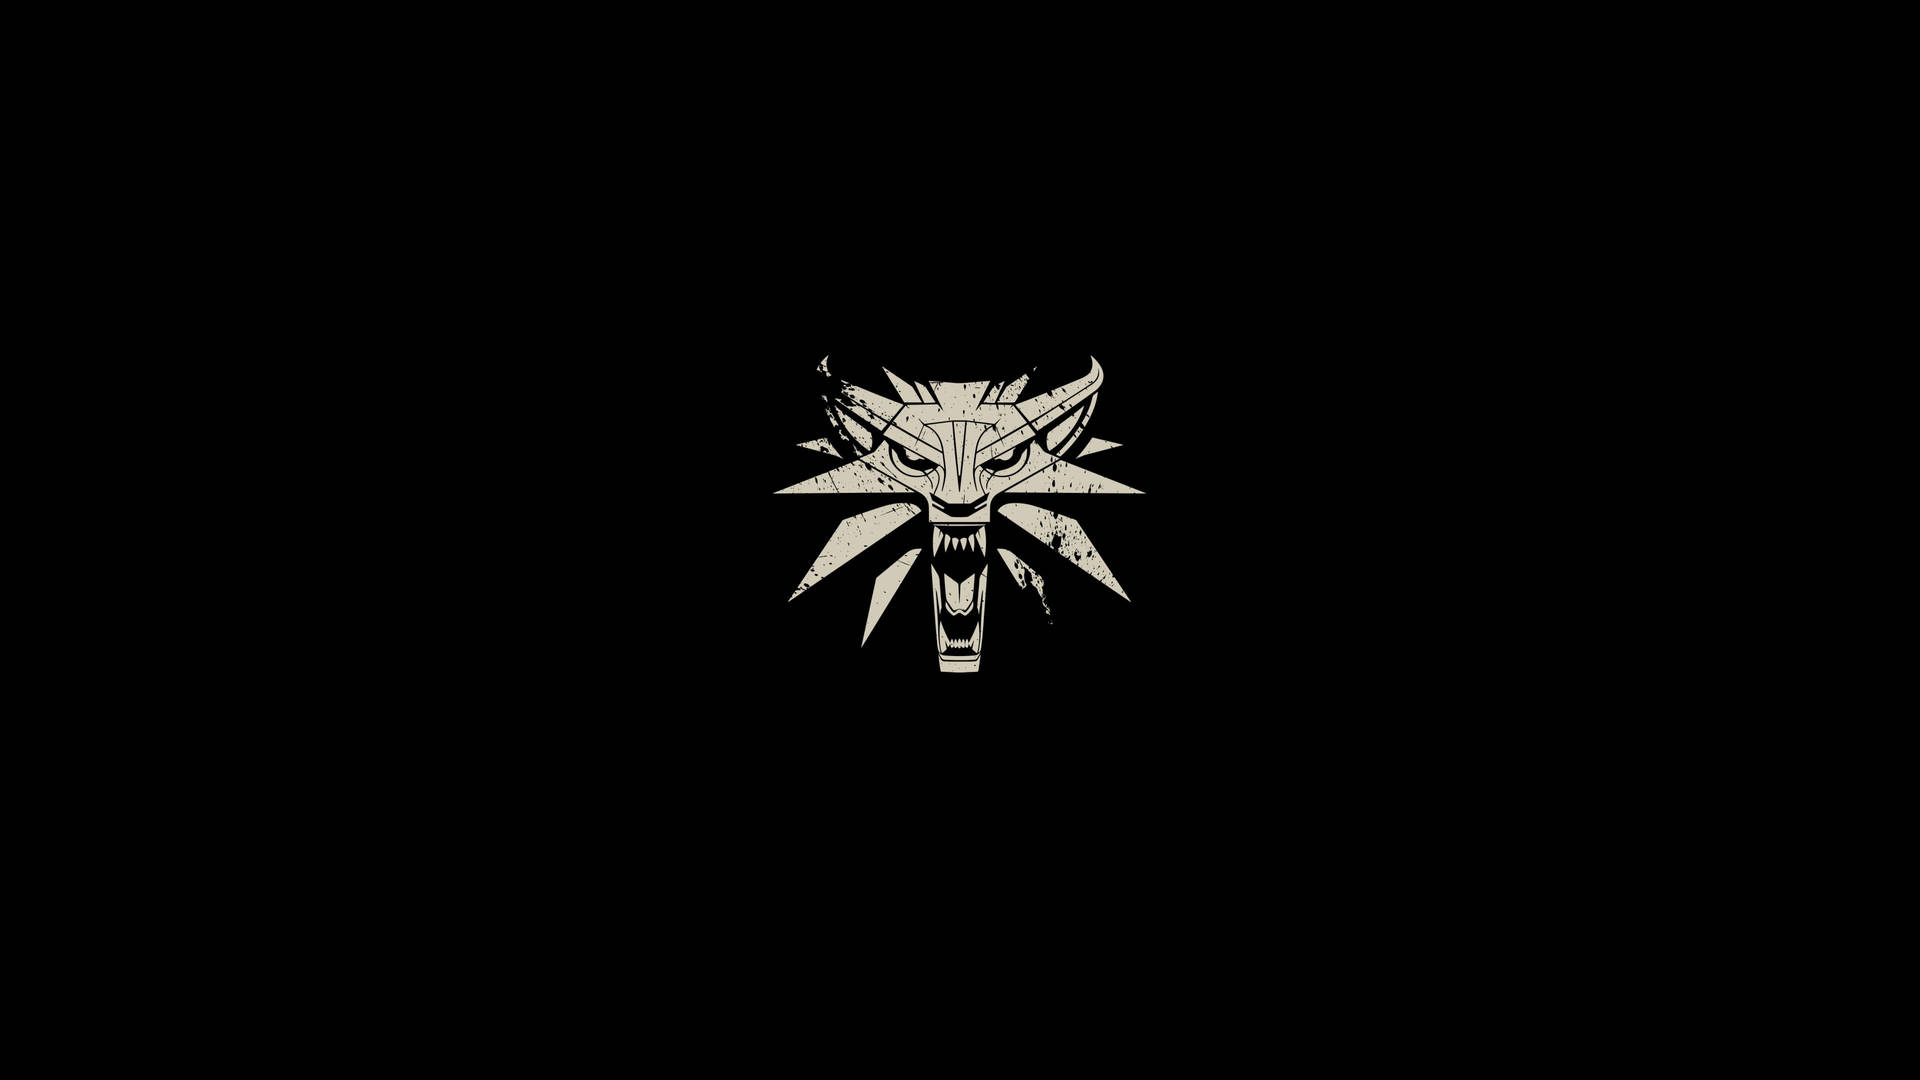 The Witcher 3: Wild Hunt Iconic Emblem - Gaming Logo Wallpaper